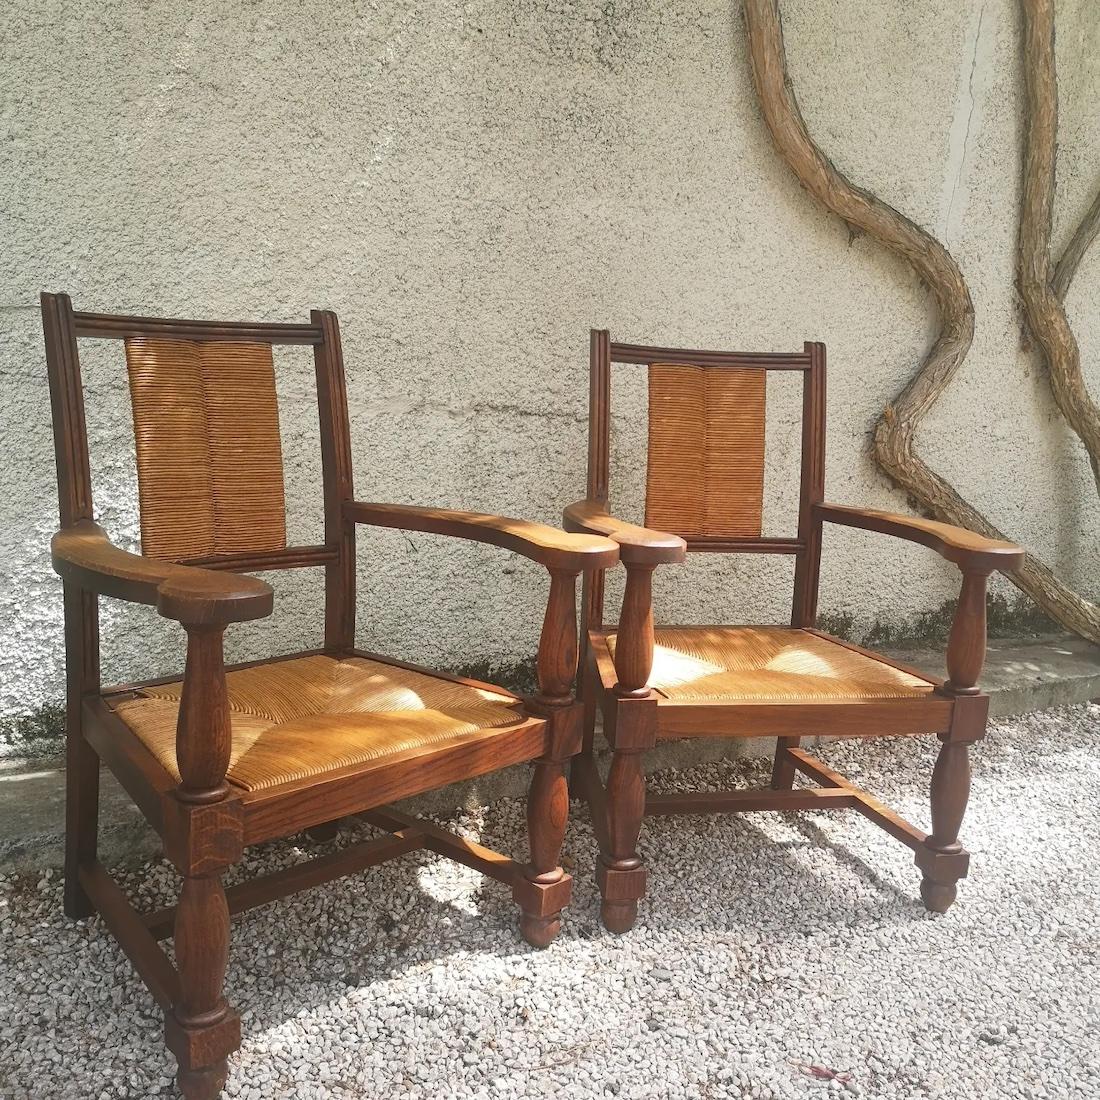 set of 2 oak armchairs and straw seat circa 1940 in the Charles Dudouyt and Victor Courtray style, good condition, some traces of proper use.
Charles Dudouyt 
The work of Charles Dudouyt, highly regarded by collectors and art deco furniture